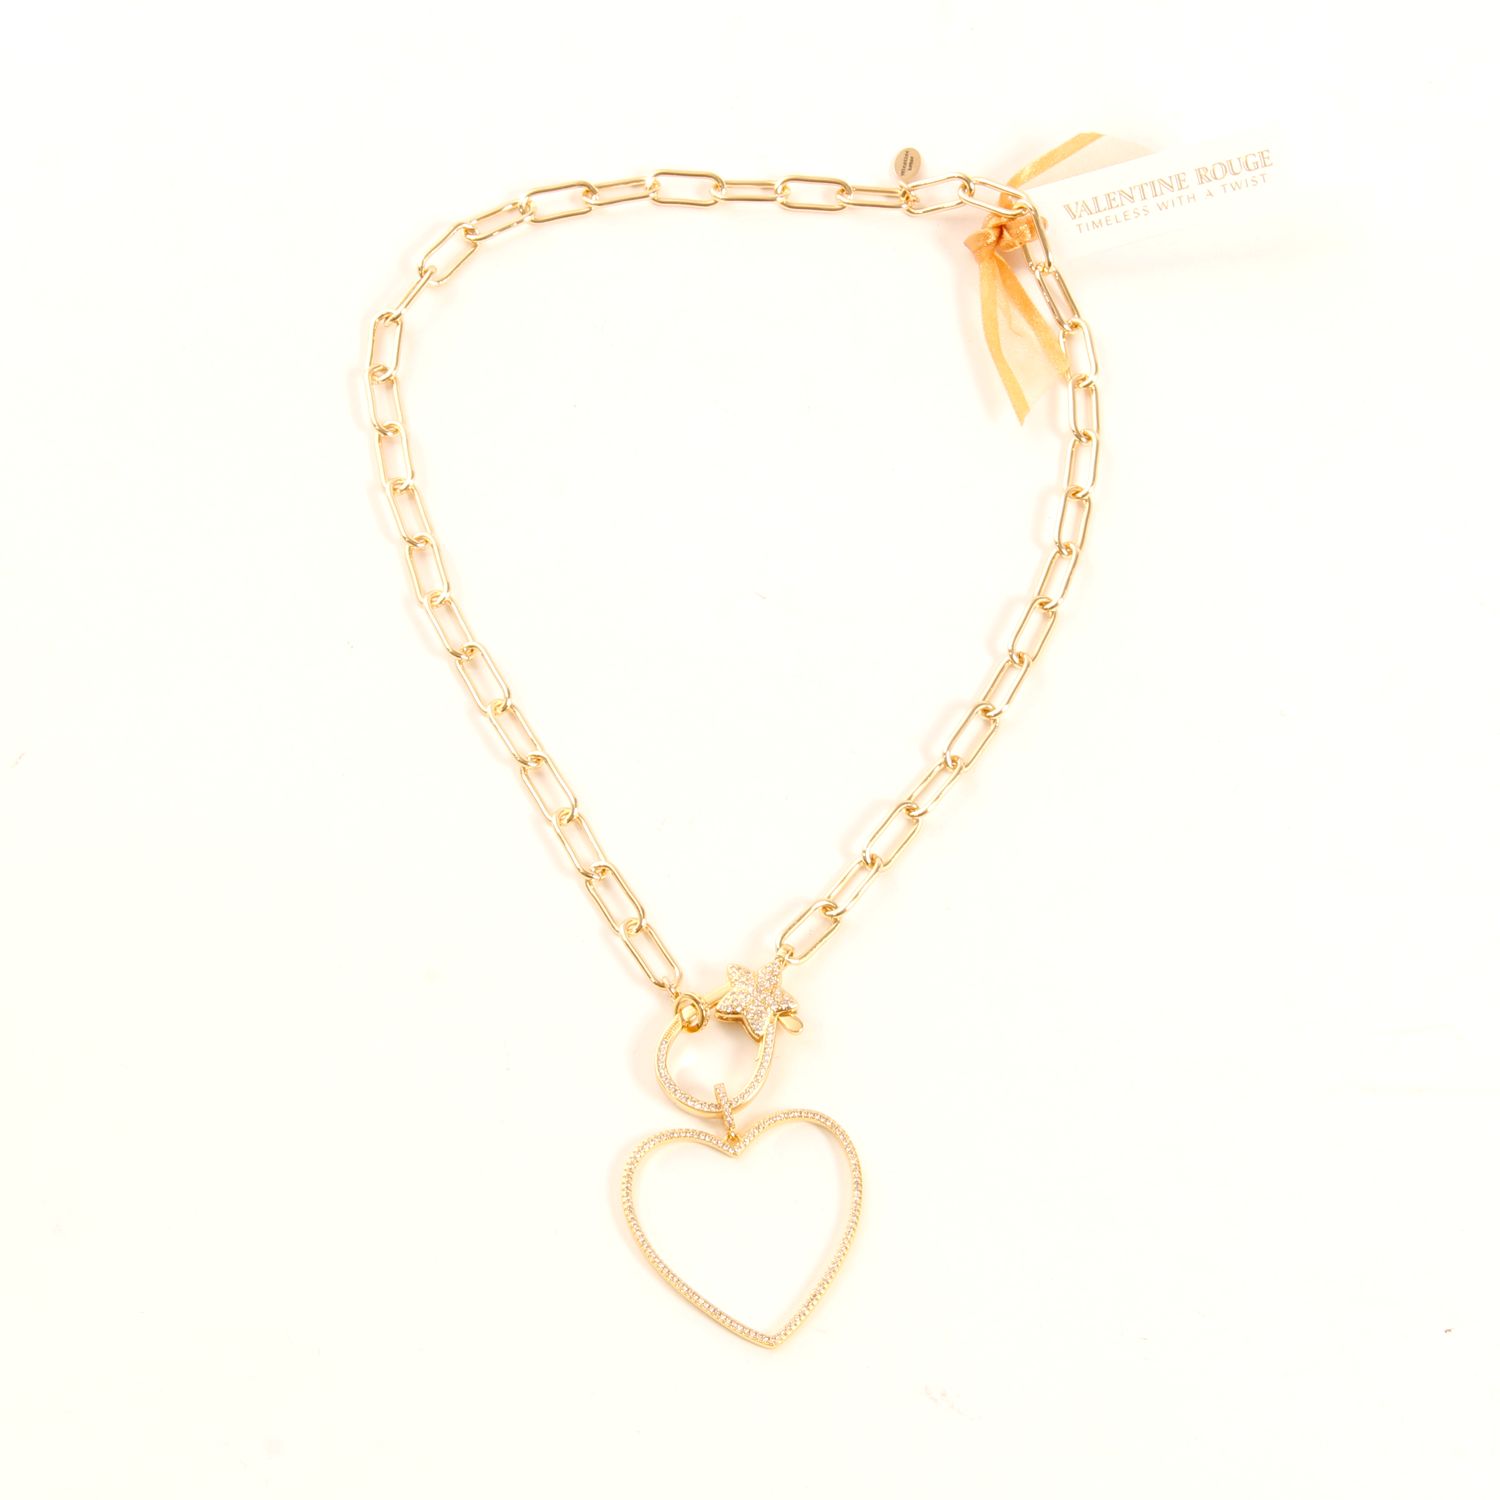 Valentine Rouge Jewellery: Open Heart Gold Necklace Product Image 1 of 3